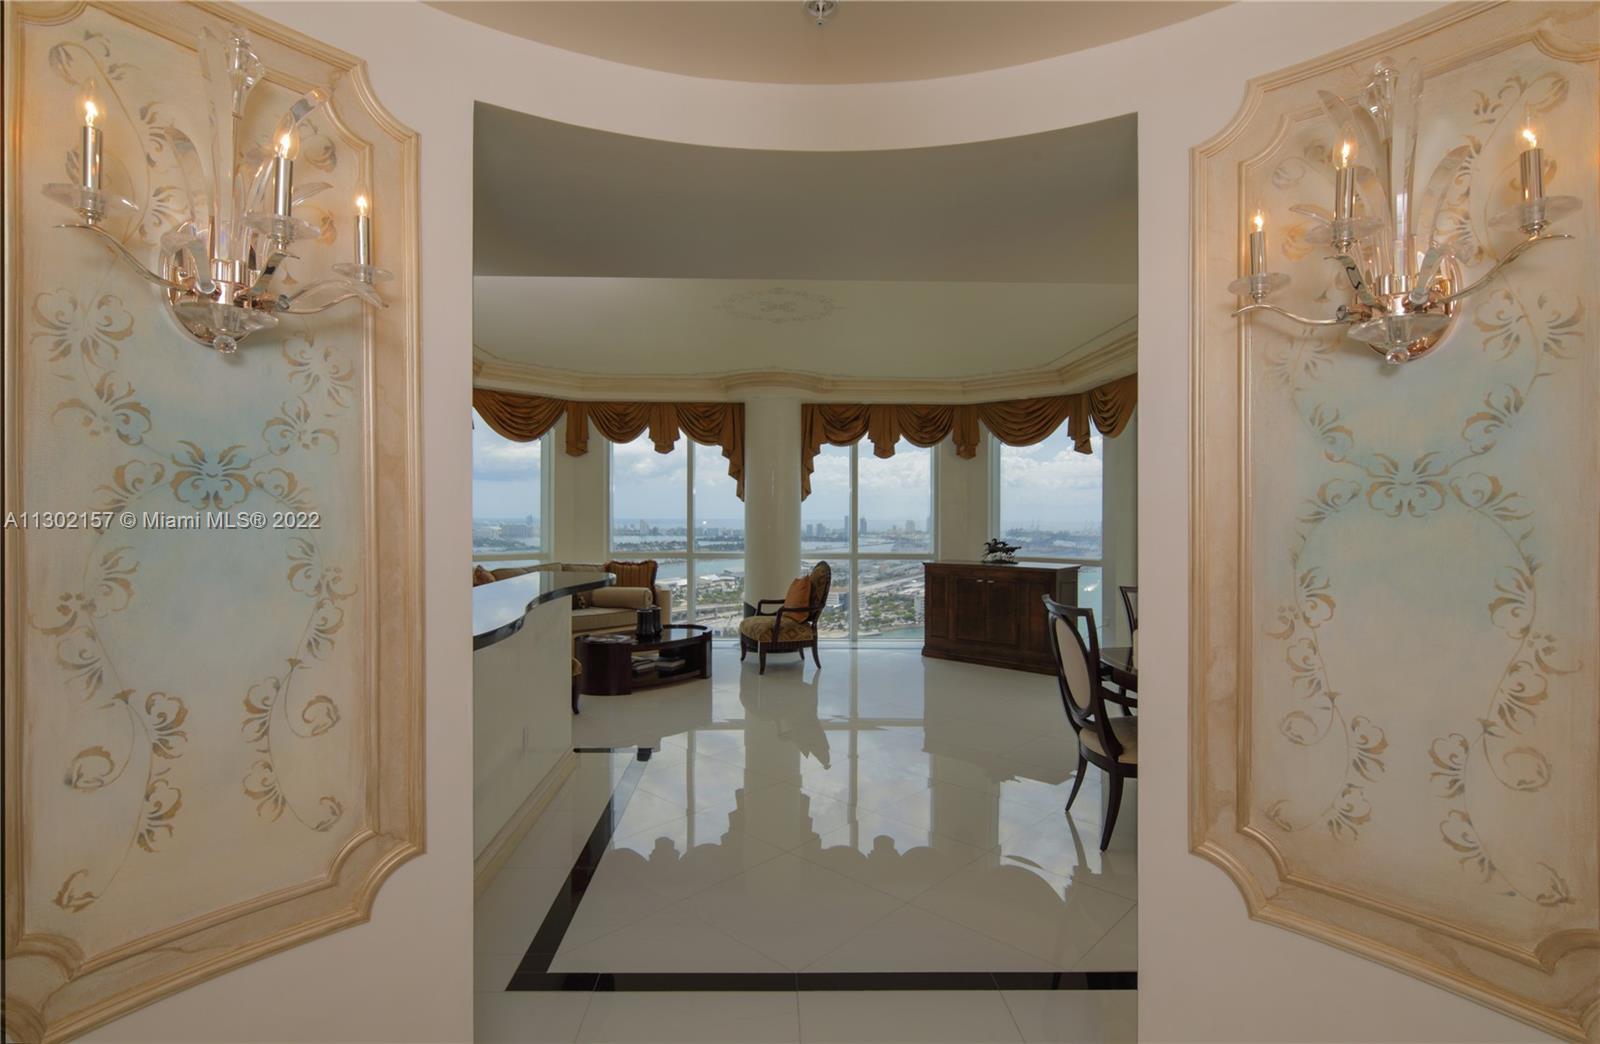 Unobstructed 180 water views, spectacular bay & ocean views, 2 balconies, ceiling glass, decorator f